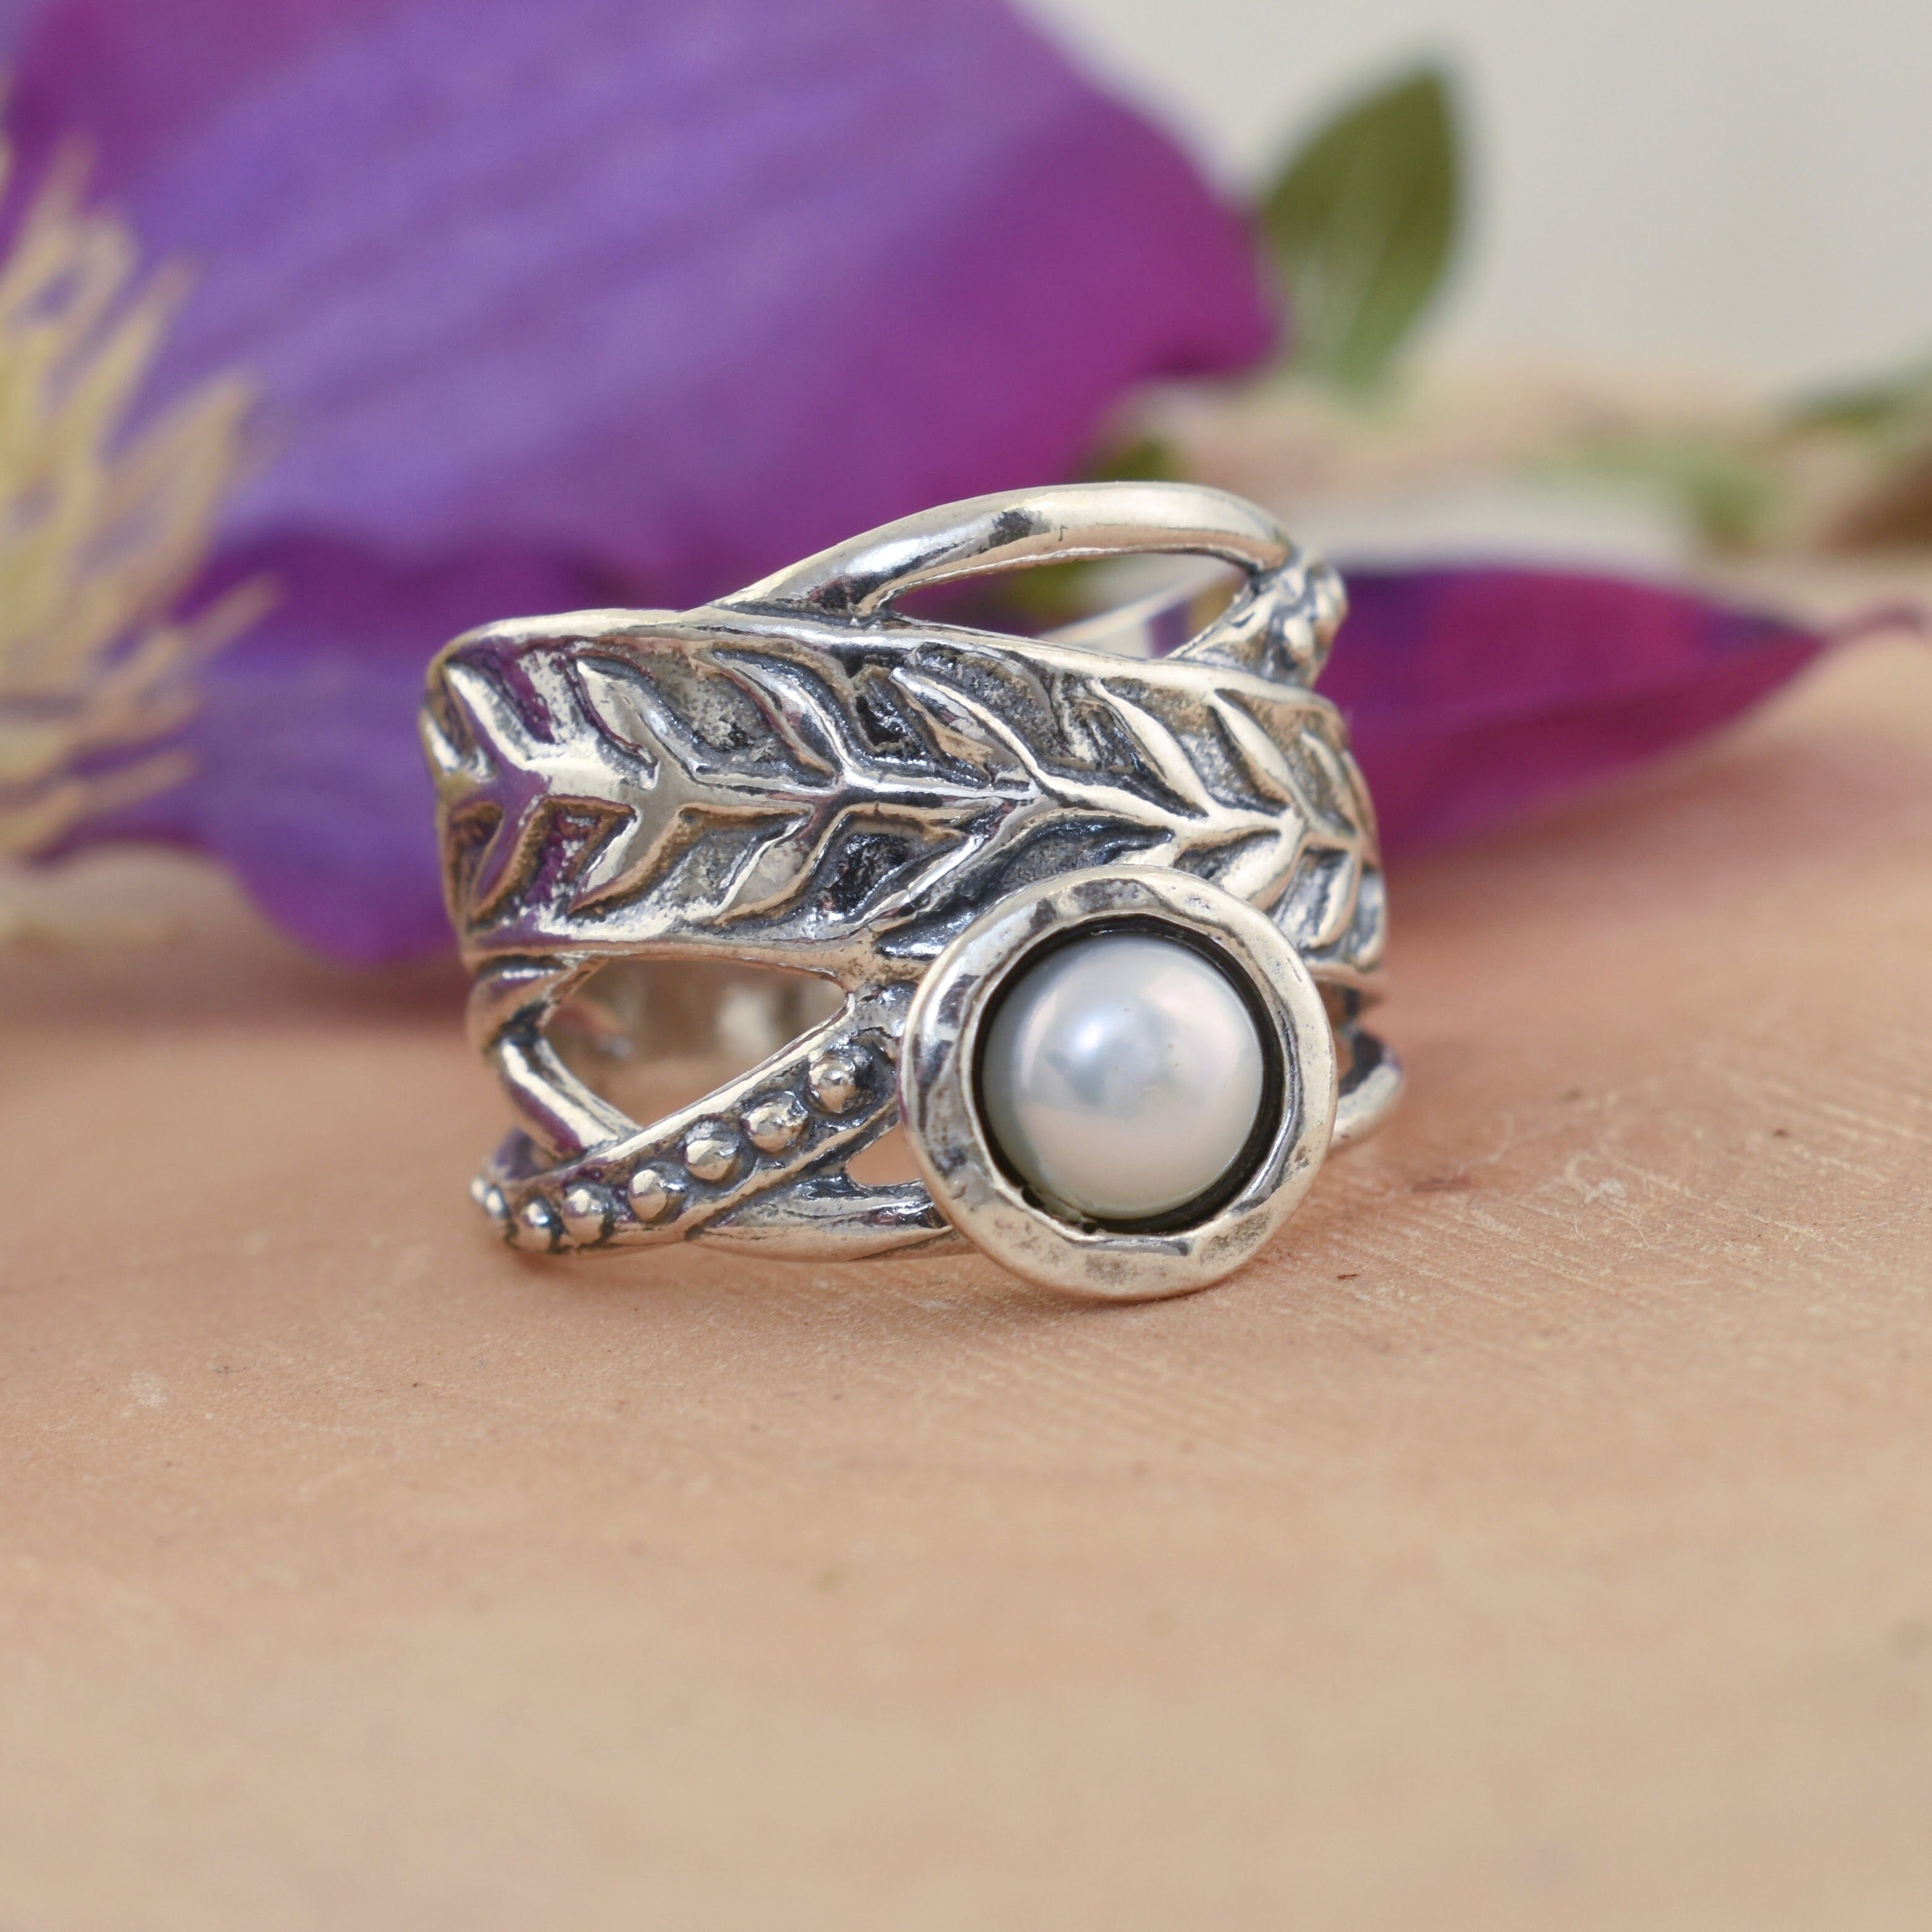 .925 sterling silver ring with vine and milgrain design